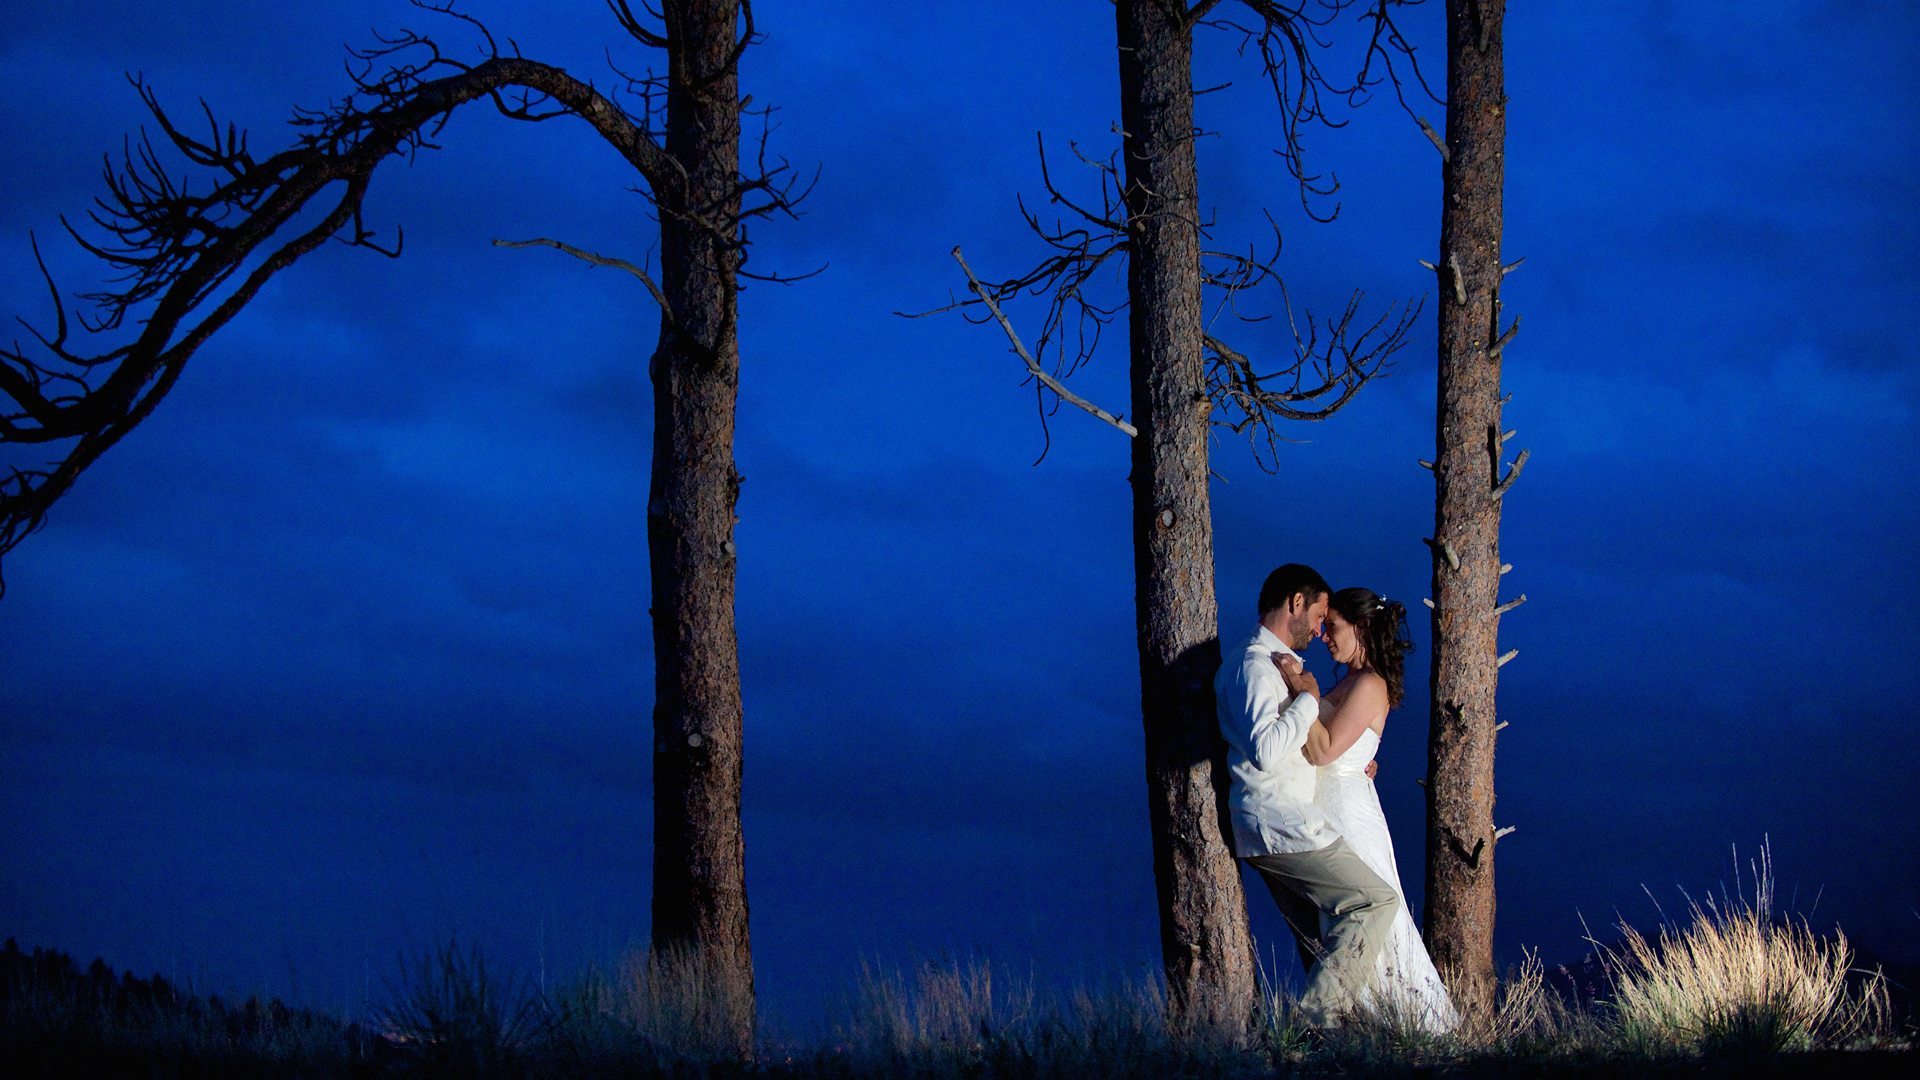 The best wedding photographer in Boulder, CO